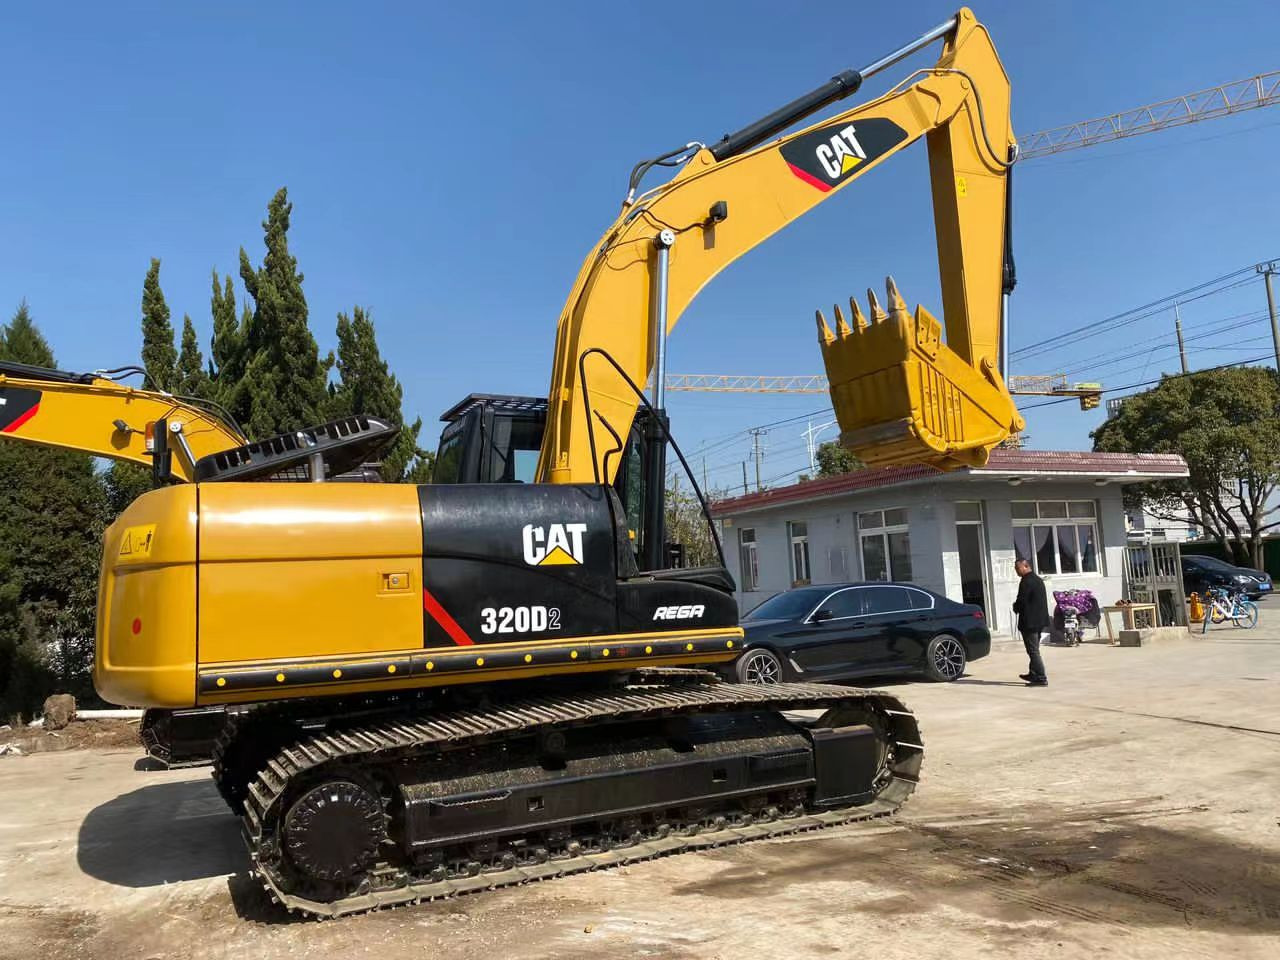 Crawler excavator Japan made original Good condition CATERPILLAR 320DL 20 ton construction machinerymodels on sale welcome to inquire: picture 2